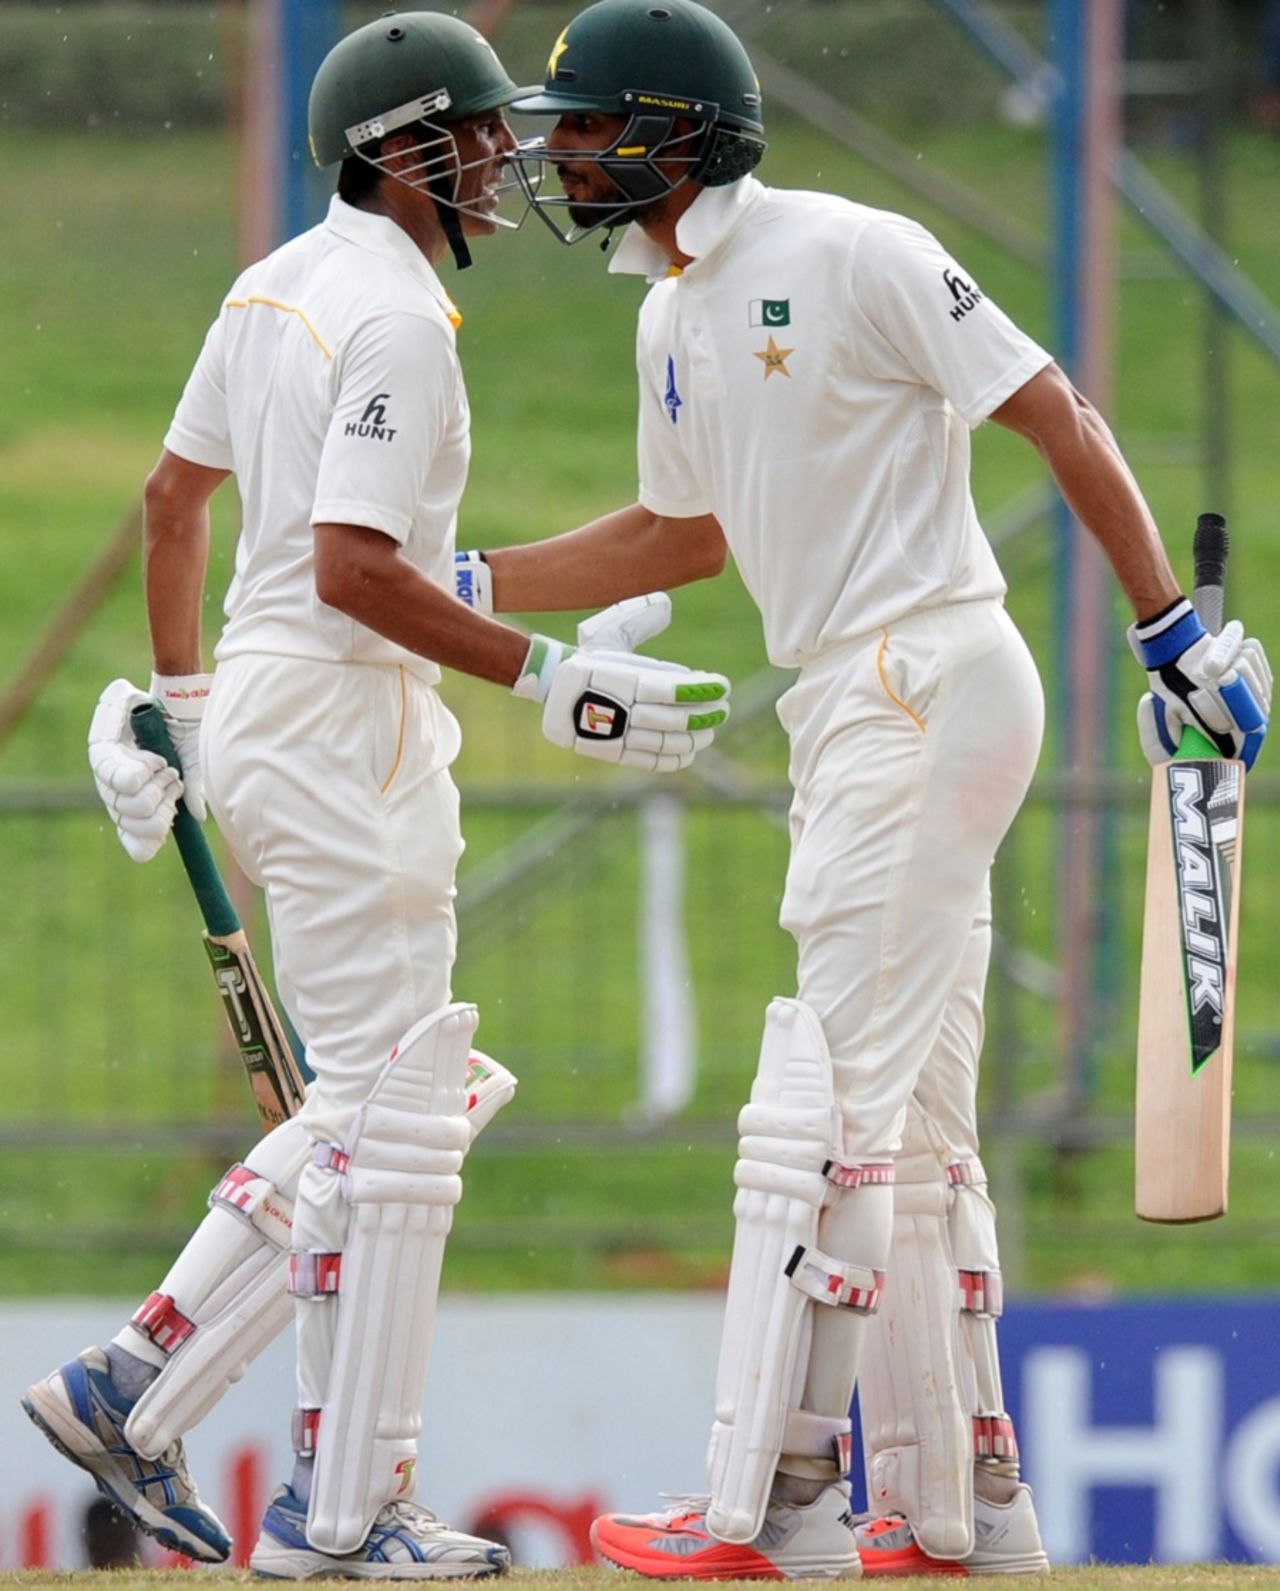 Shan Masood is congratulated by Younis Khan after he reached his fifty, Sri Lanka v Pakistan, 3rd Test, Pallekele, 4th day, July 6, 2015